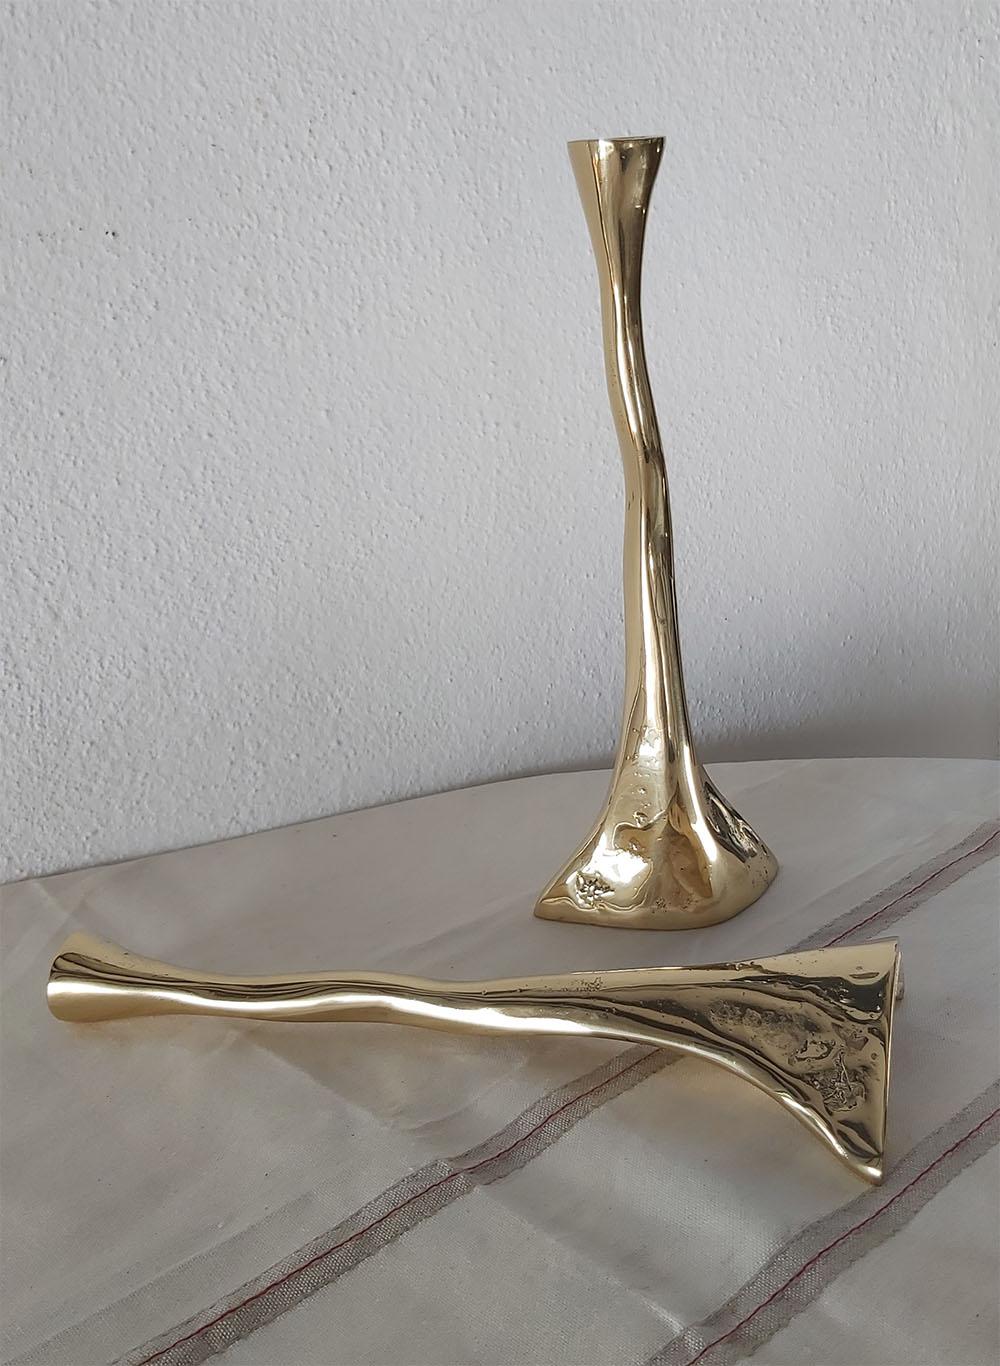 Spanish Candelabra Cobra G022 Cast Brass Gold coloured made in Spain by David Marshall For Sale